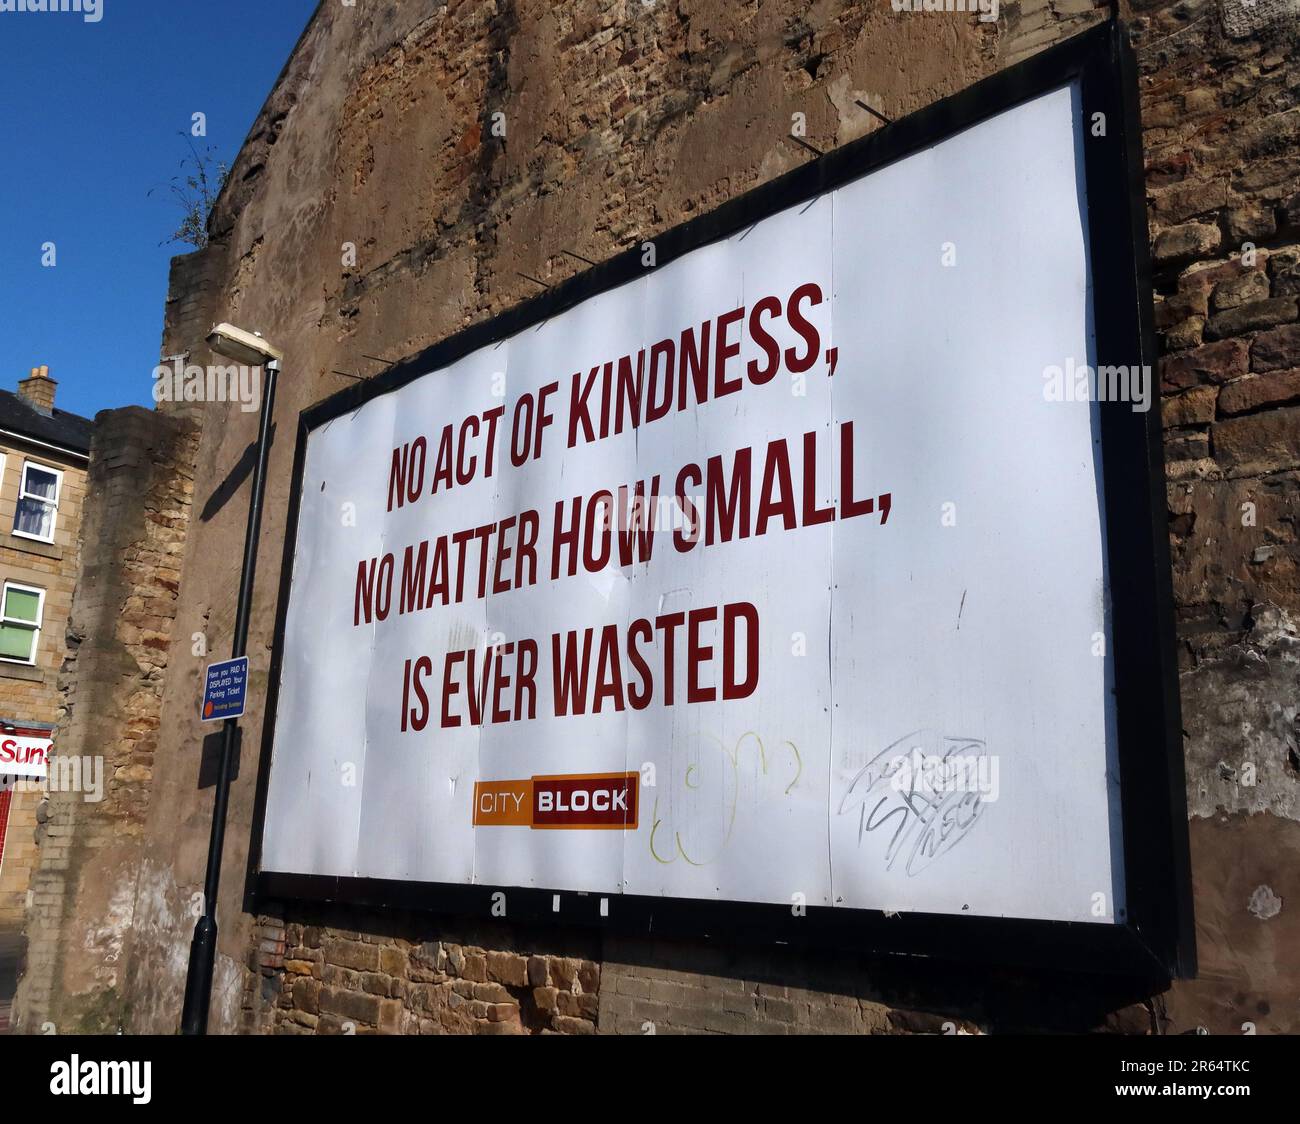 Poster in Lancaster city centre - Aesop - no act of kindness,no matter how small, is ever wasted - Chapel St,Lancaster,Lancashire, England,UK,LA1 1NZ Stock Photo